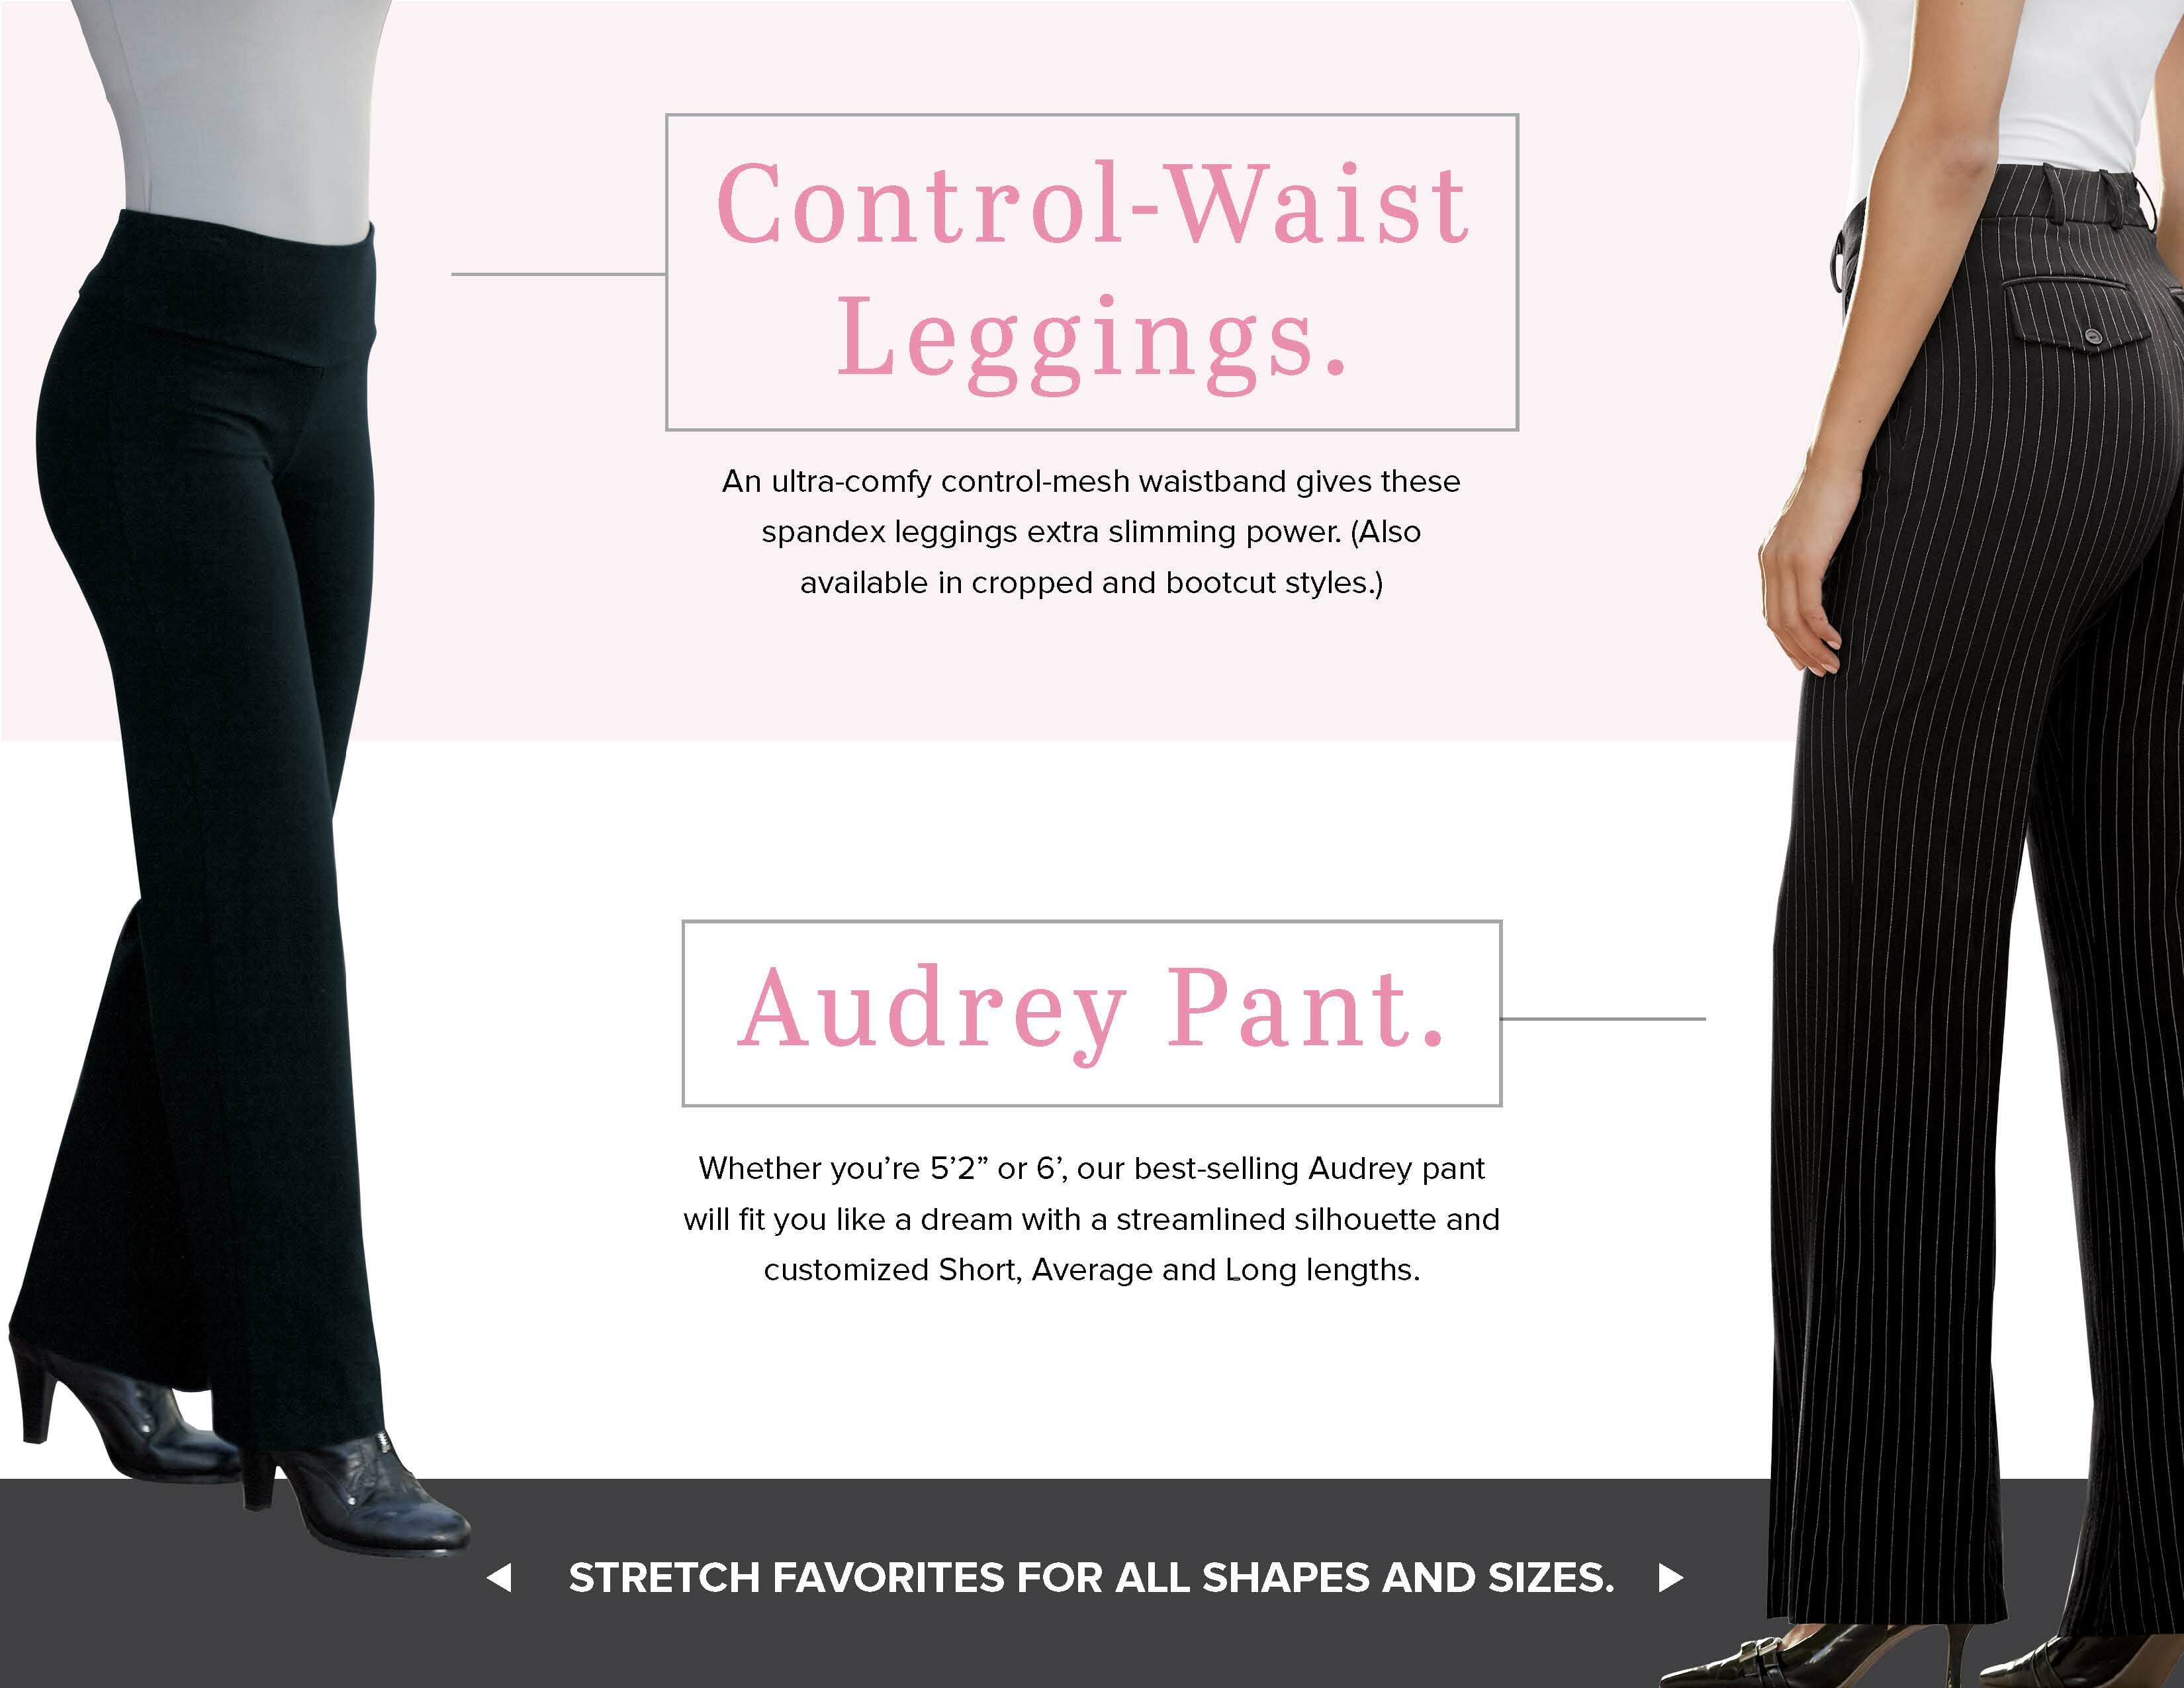 2 women in different styles of pants